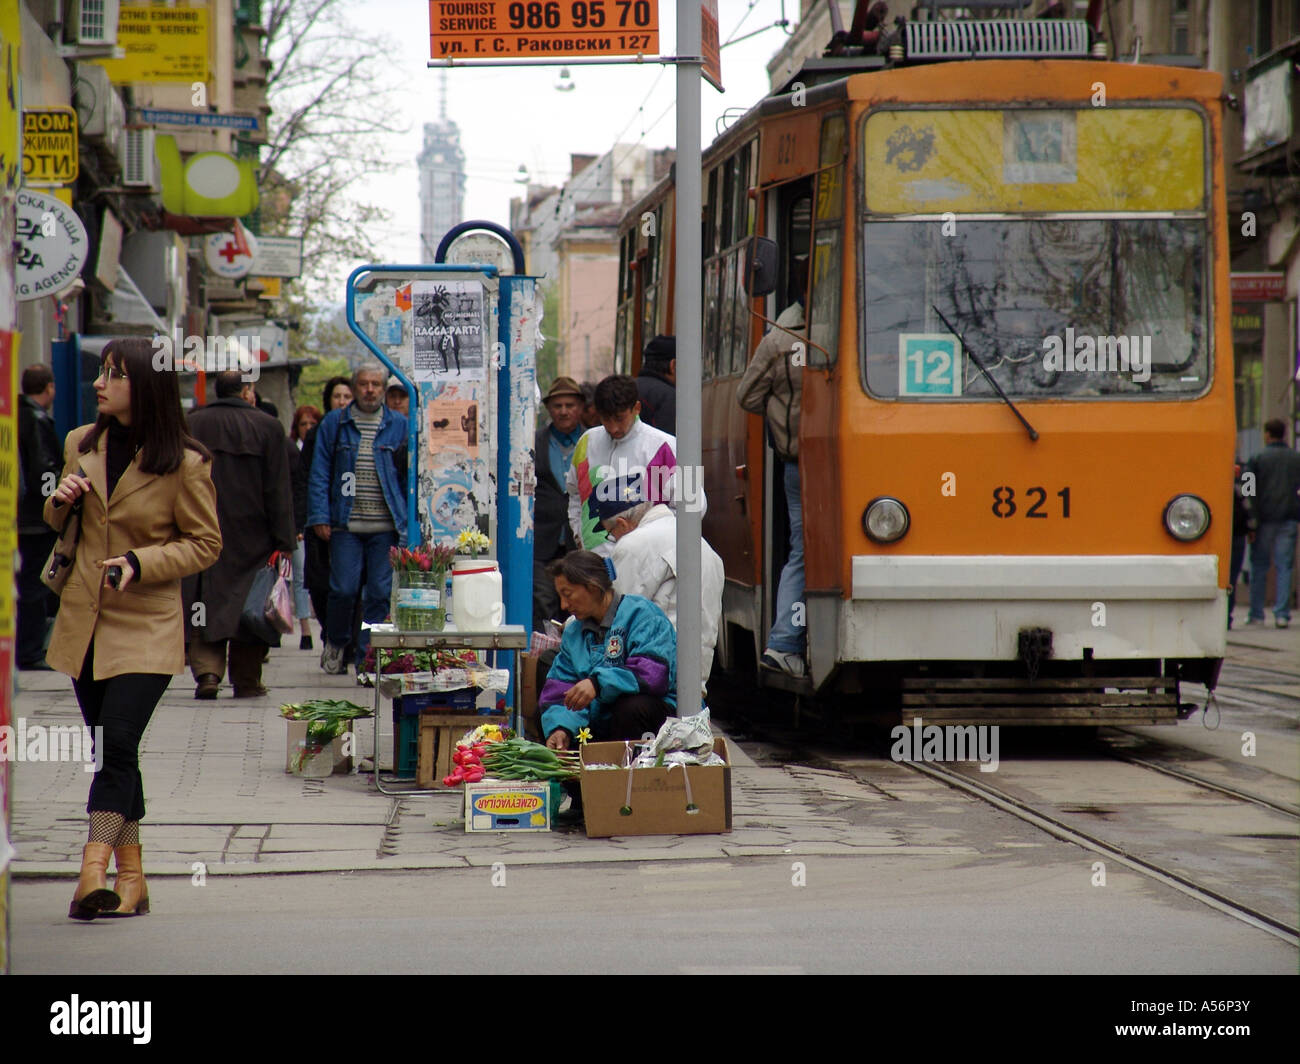 Painet ja0642 bulgaria street scene 2004 europe country developing nation less economically developed culture emerging Stock Photo